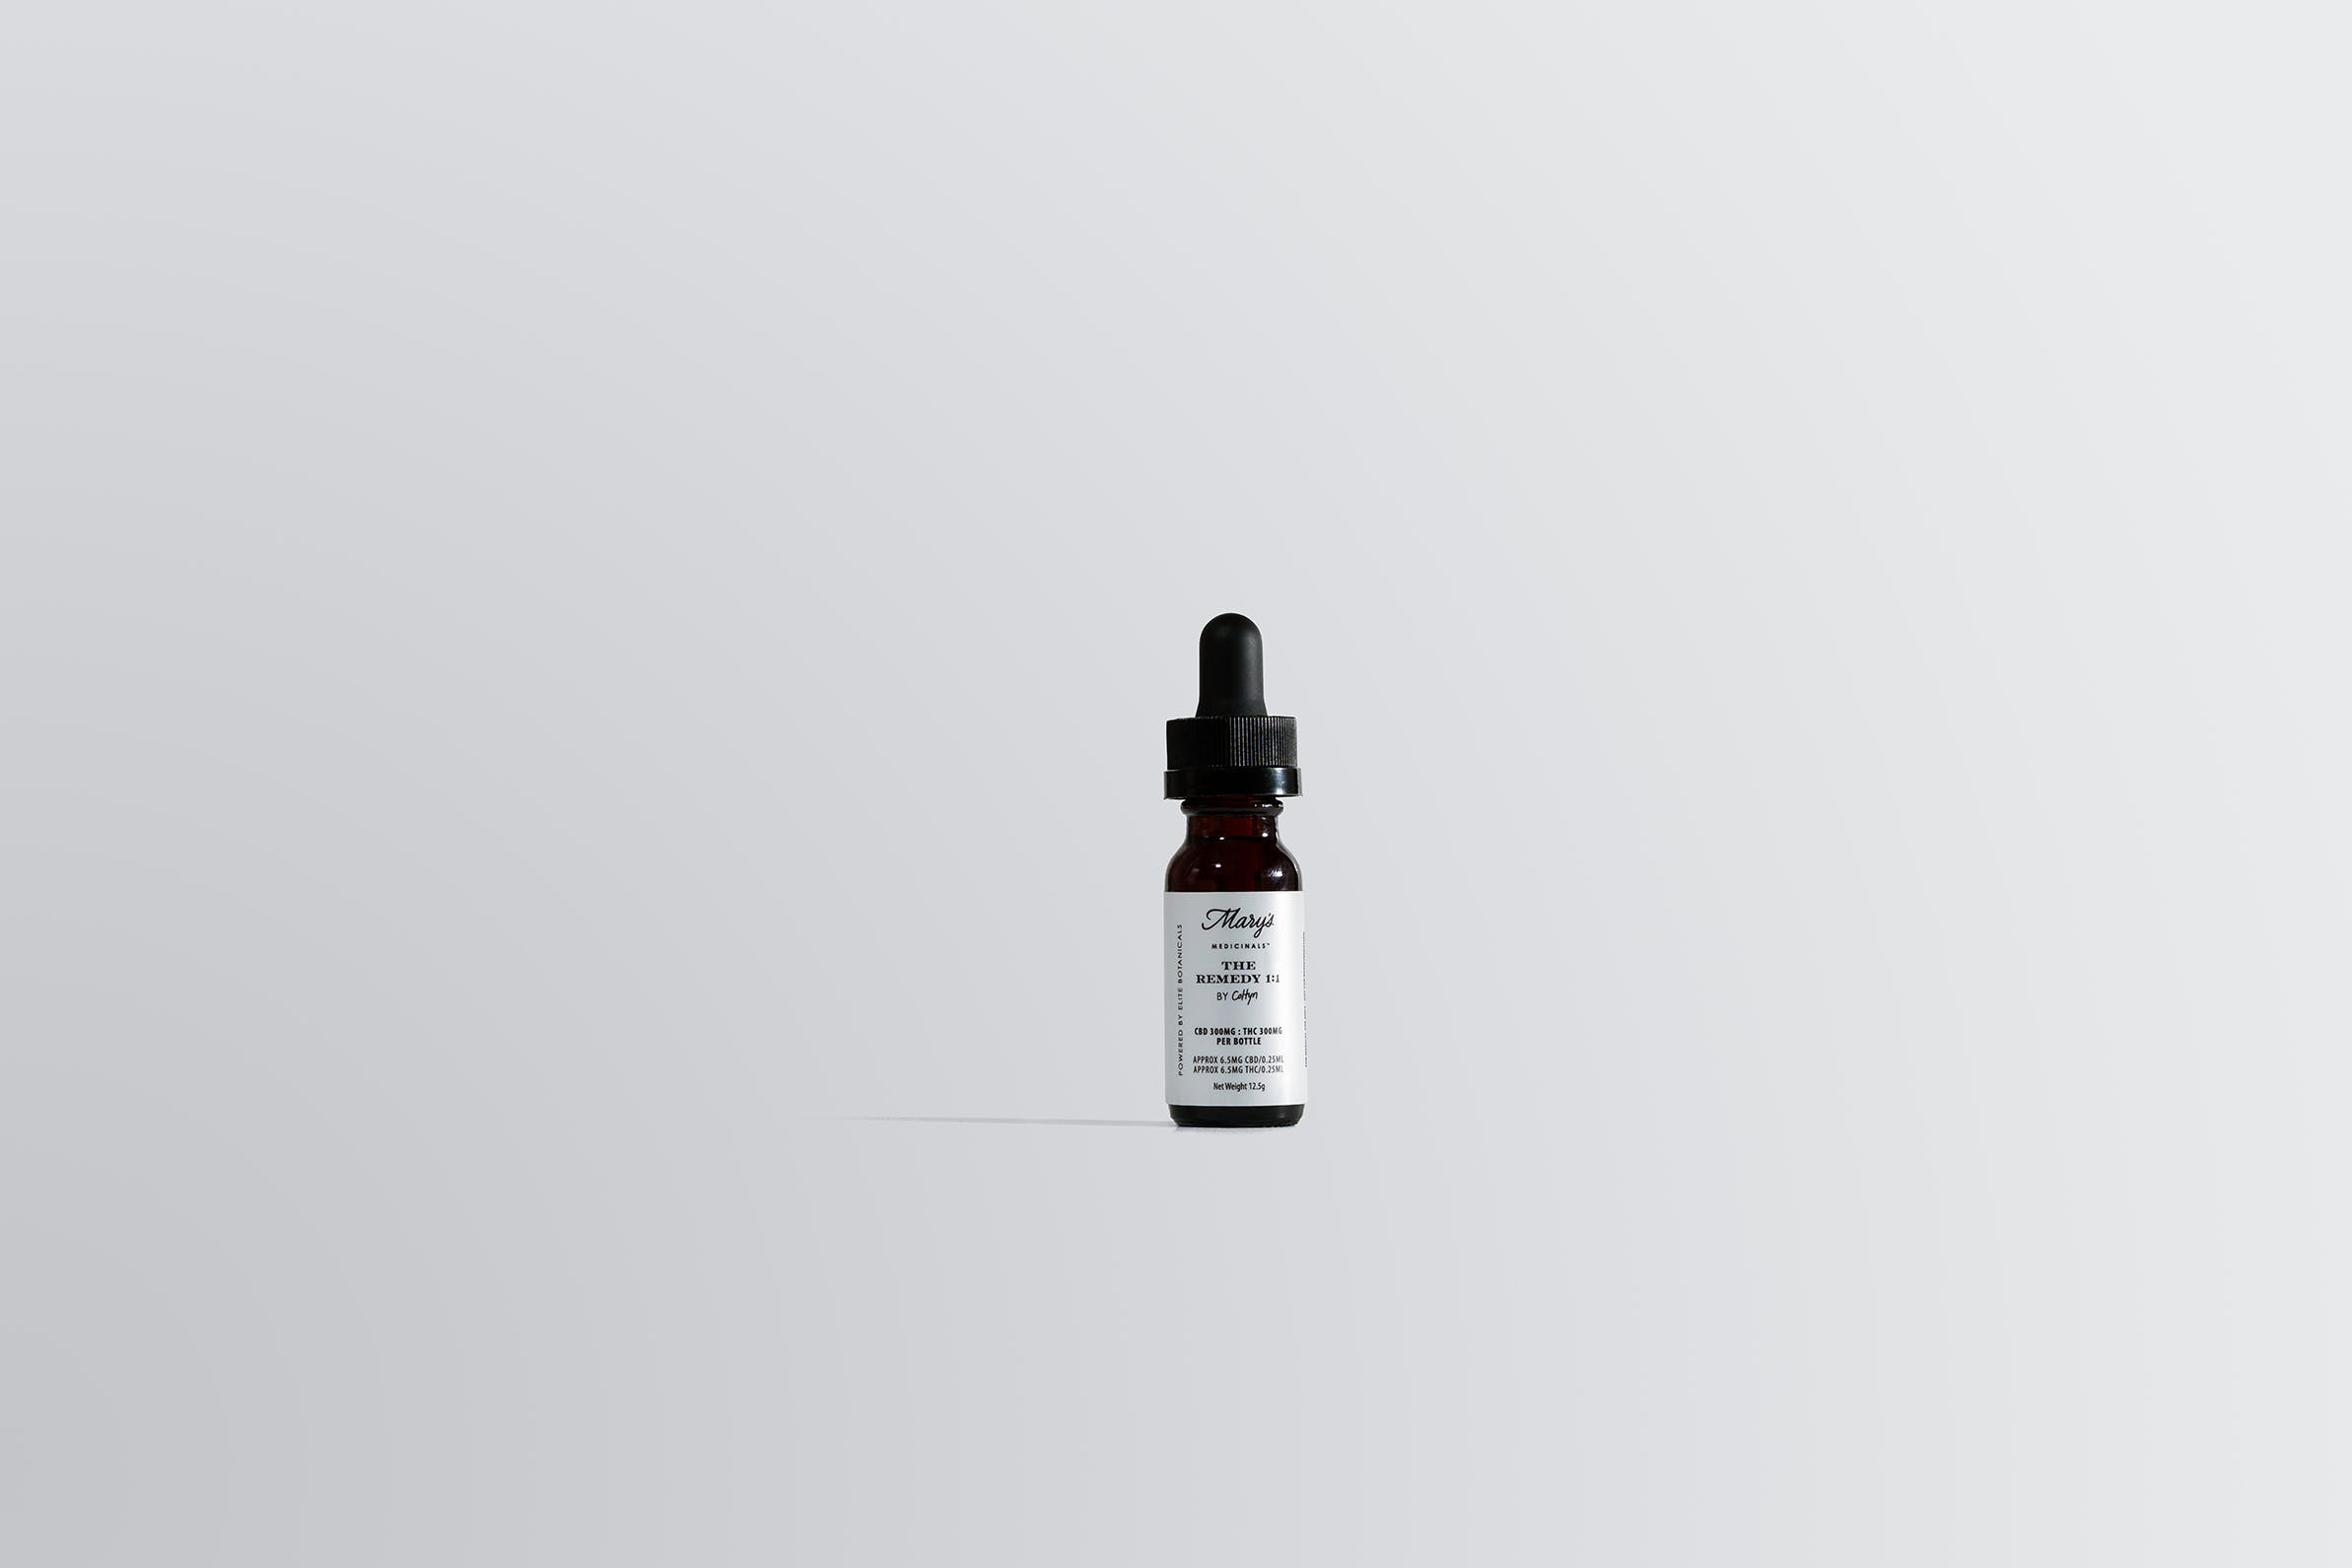 Mary's Medicinals The Remedy CBD Tincture